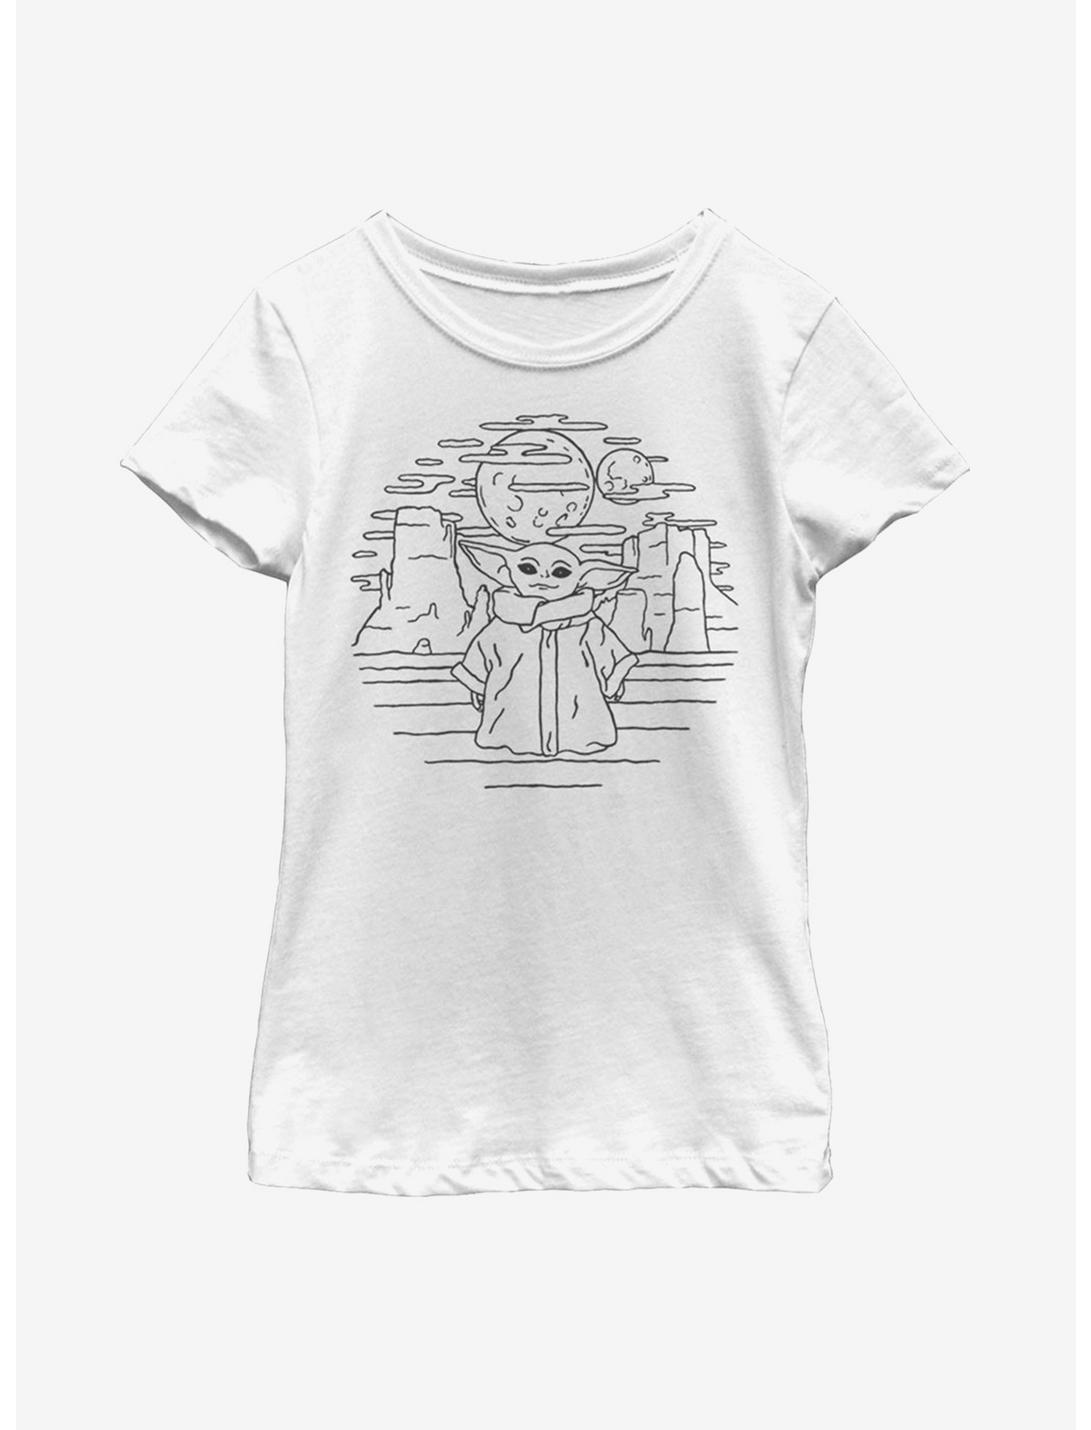 Star Wars The Mandalorian The Child Doodle Youth Girls T-Shirt, WHITE, hi-res